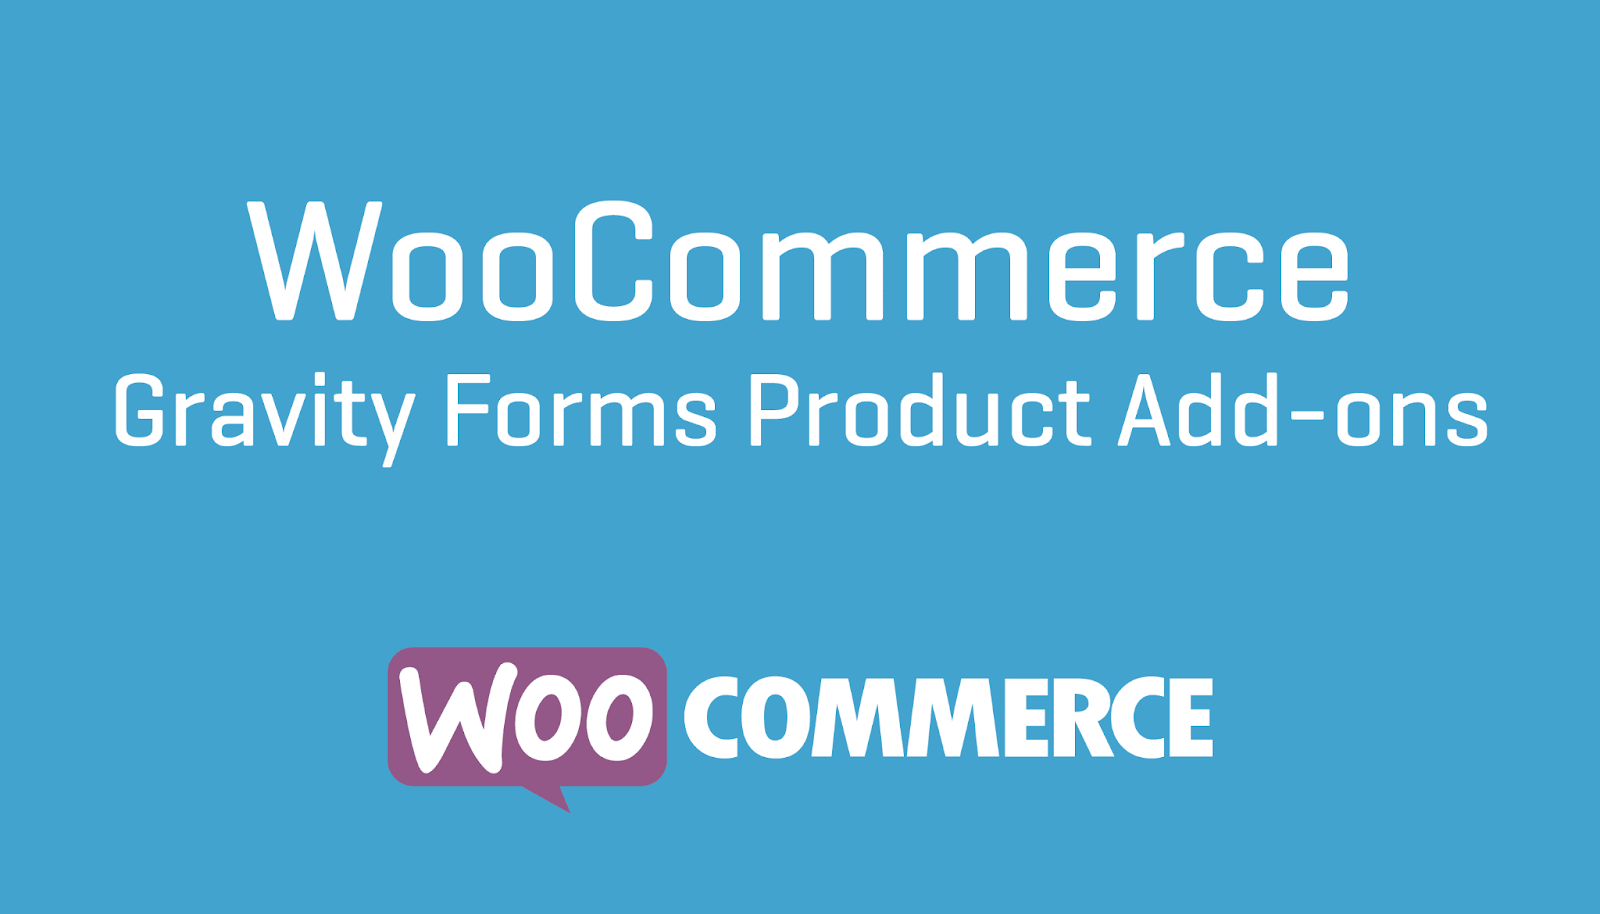 ppwp-woocommerce-gravity-forms-product-add-ons